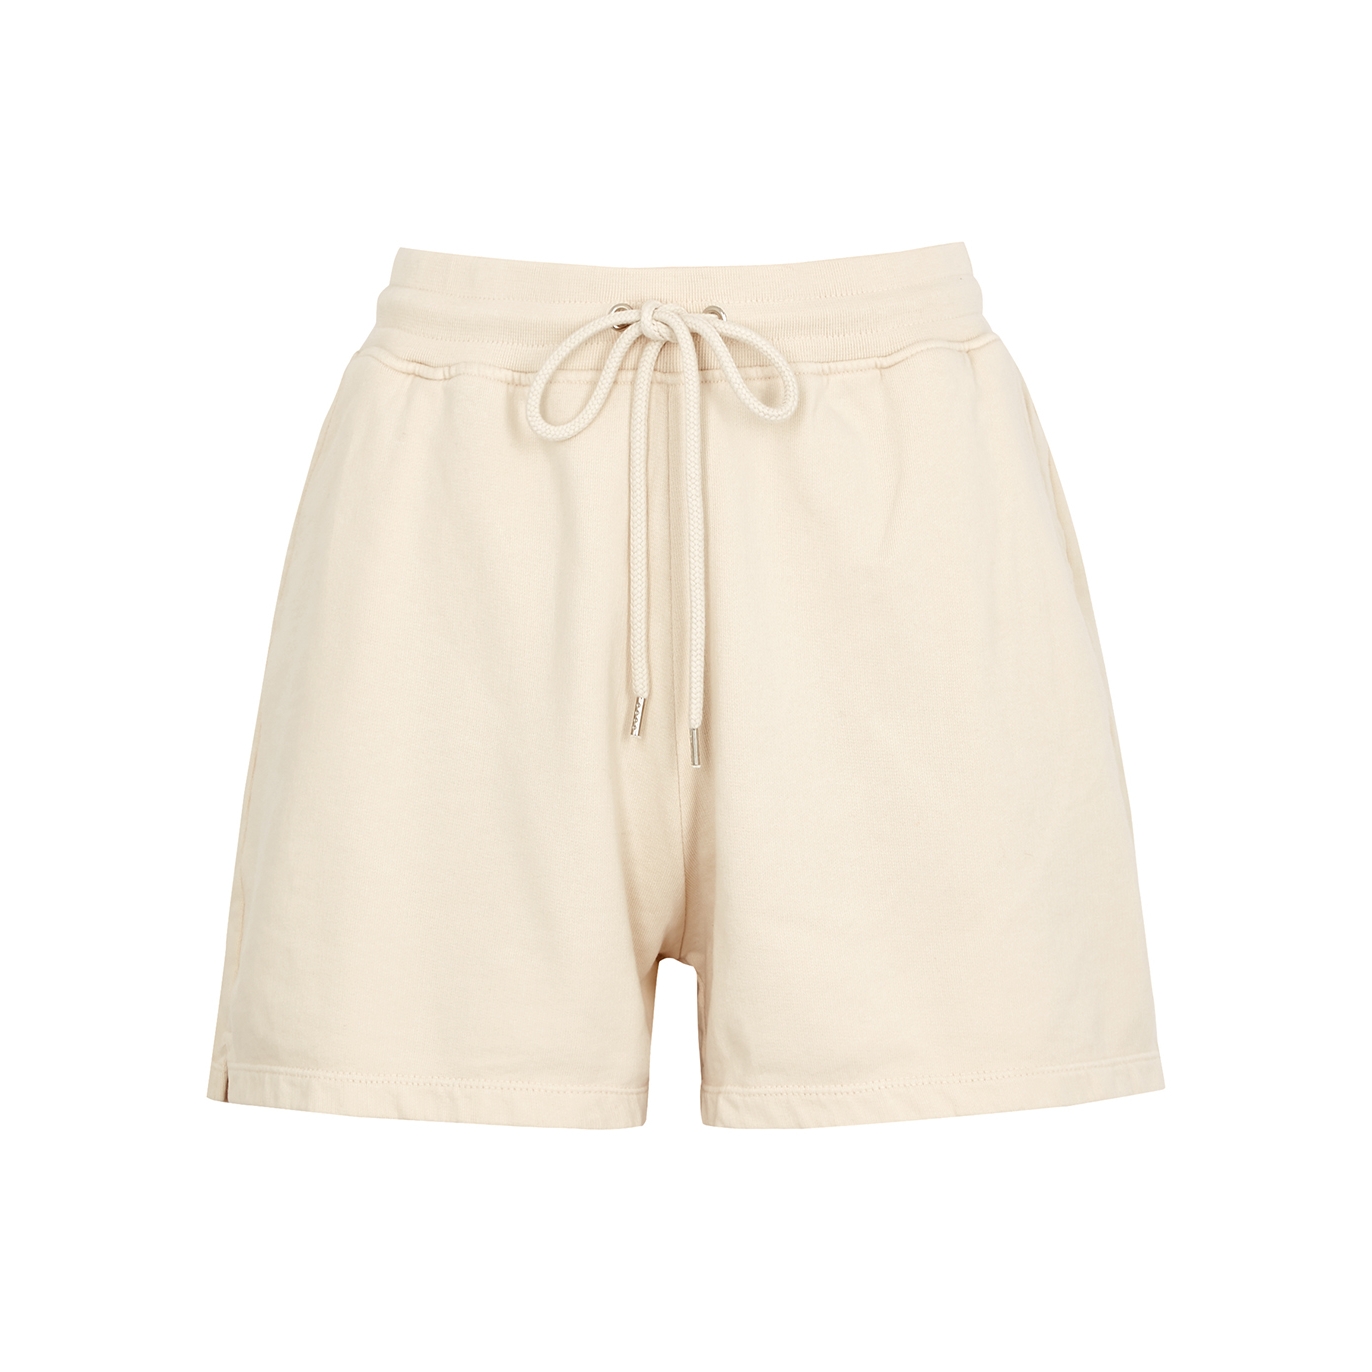 Colorful Standard Ivory Cotton Shorts